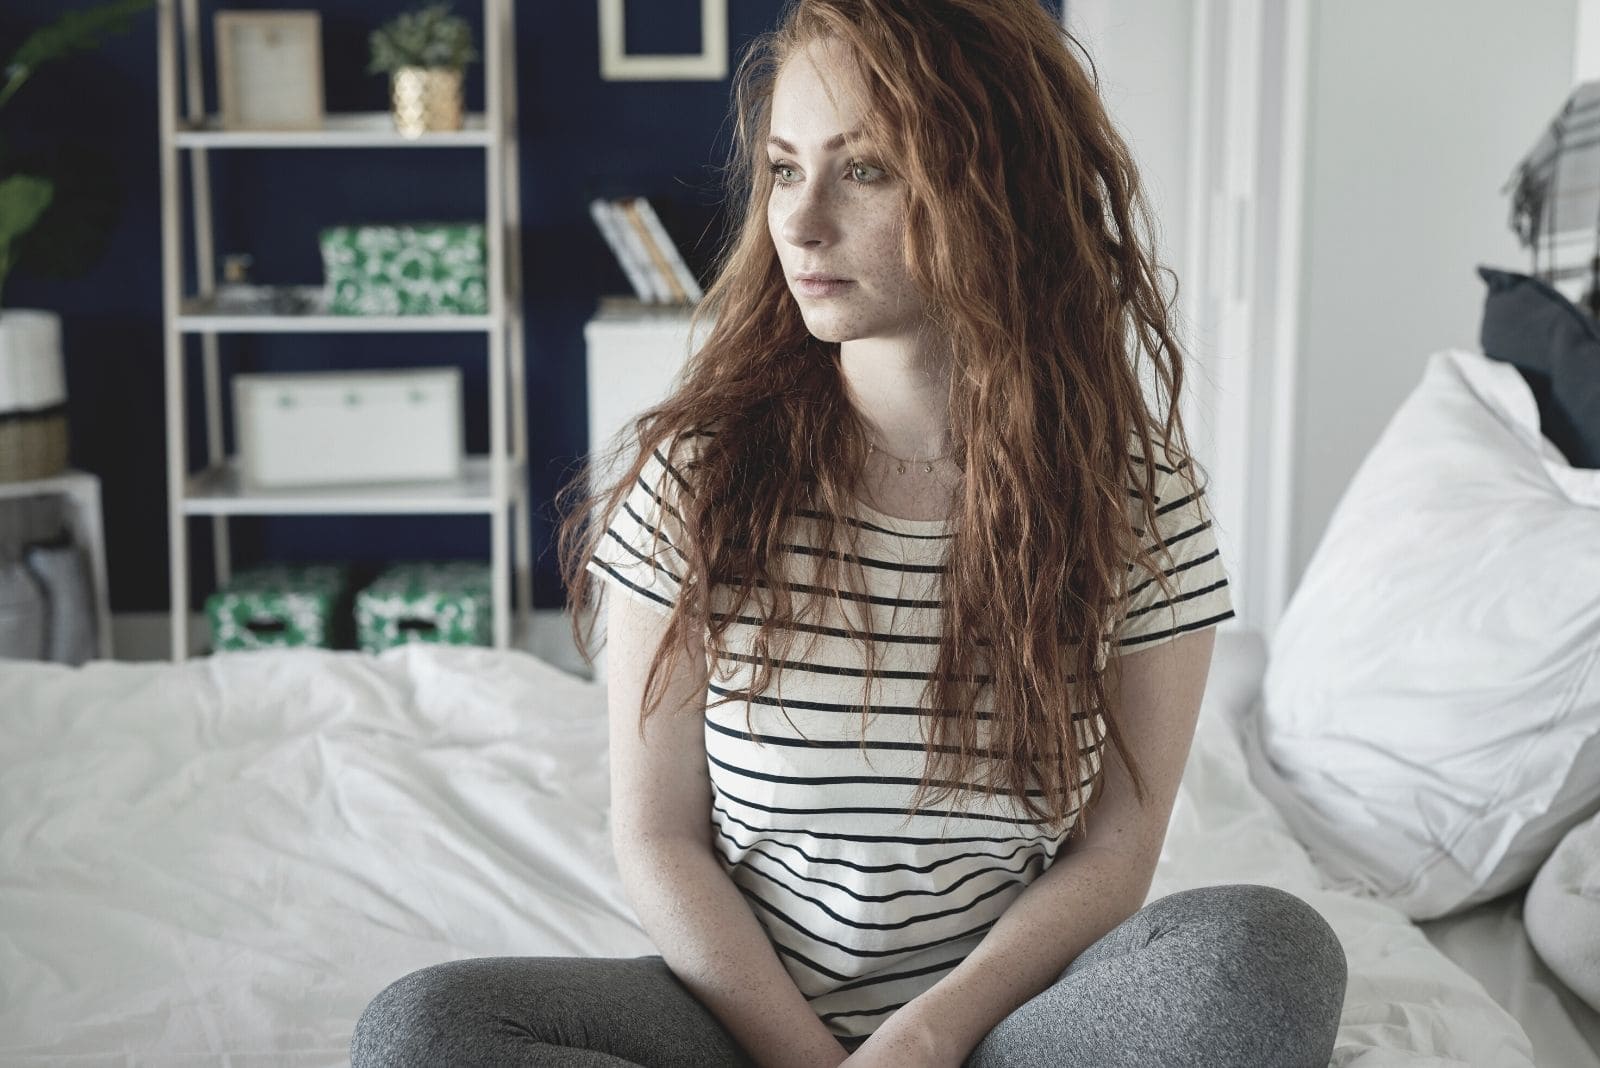 sad young woman sitting alone on bed looking away